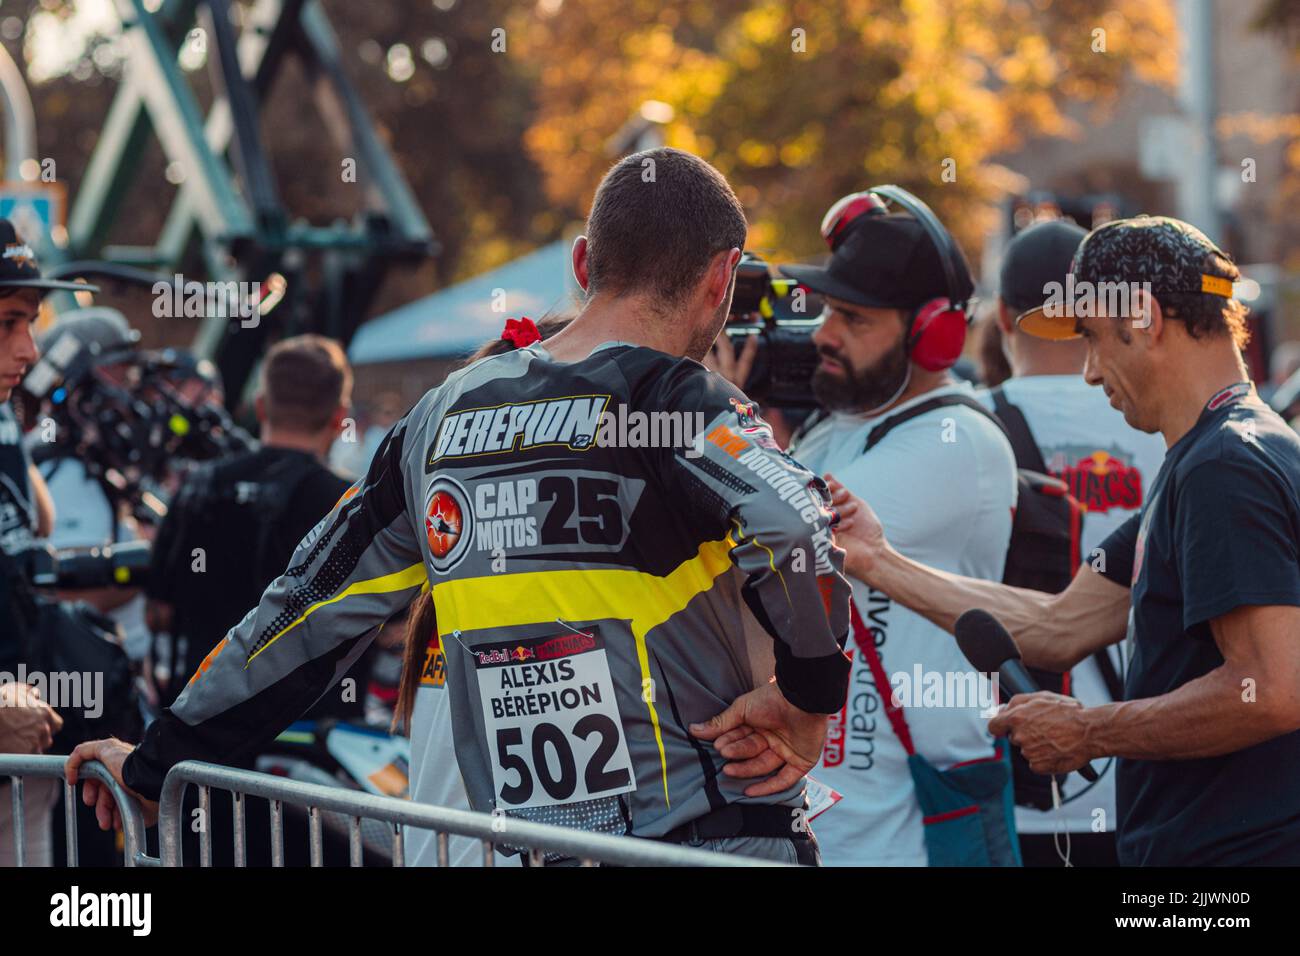 the participant in the crowd during Red Bull Romaniacs hard enduro Rallye - Prolog in Sibiu city, Romania Stock Photo